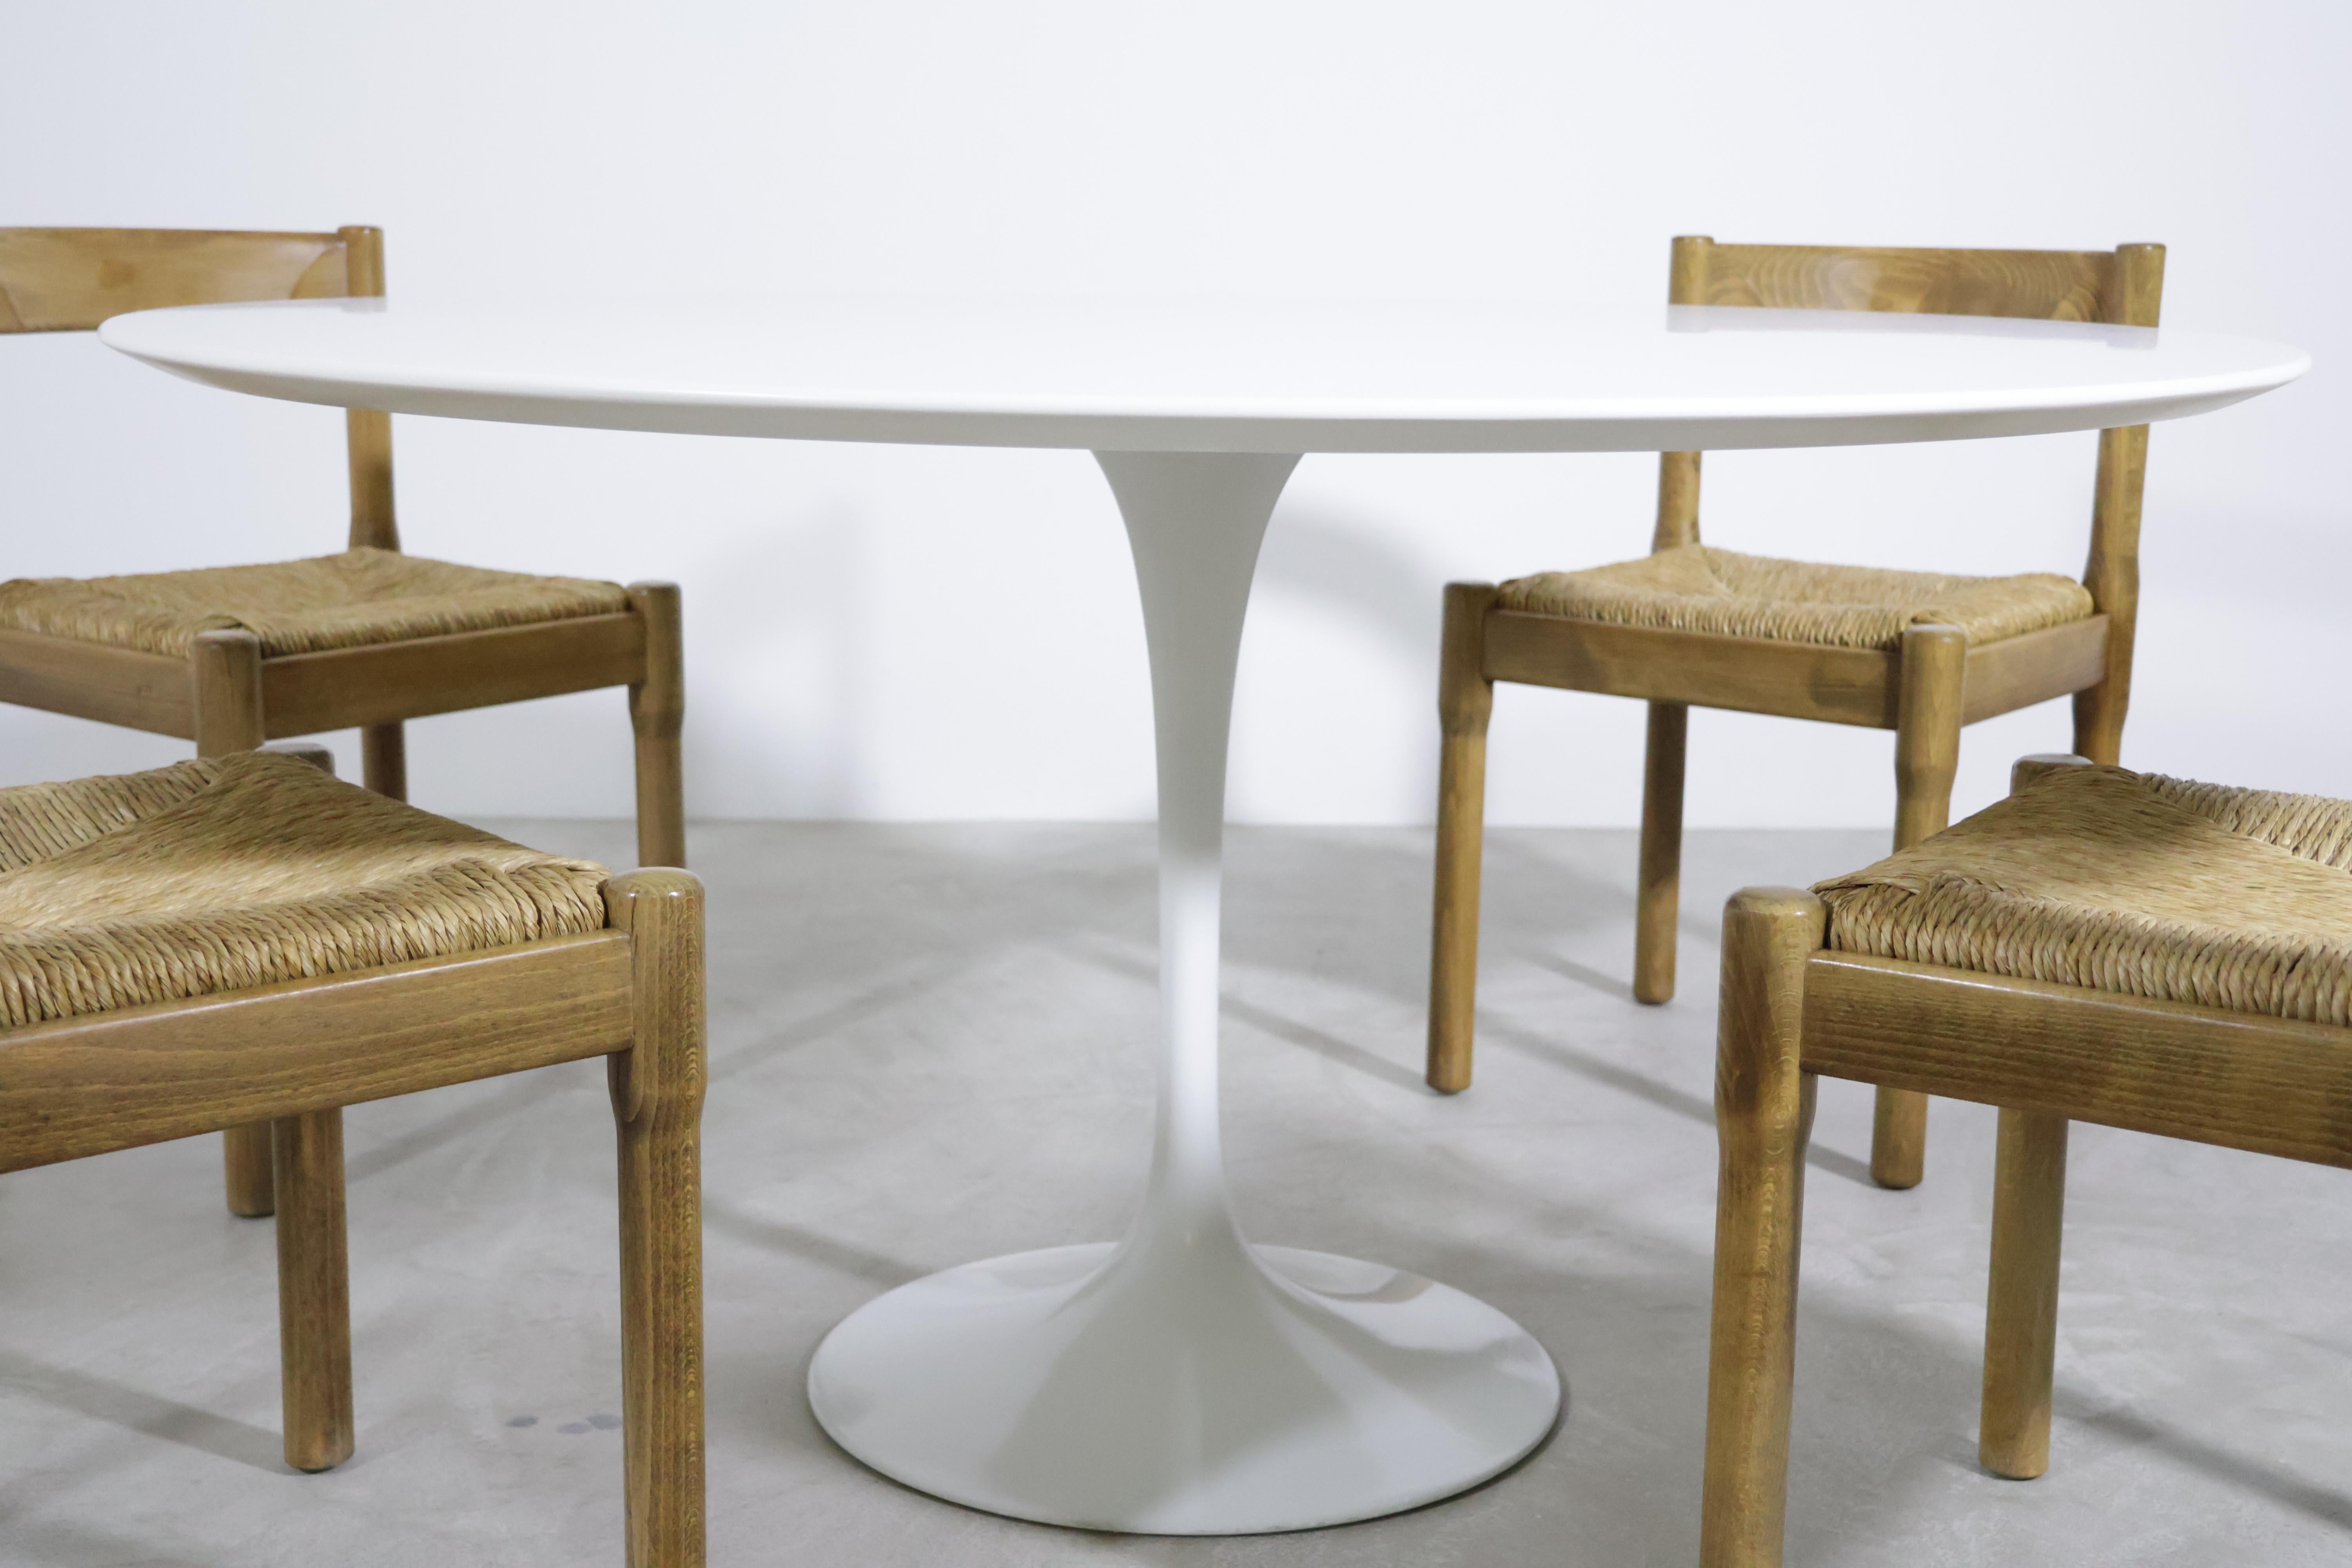 Cane Vico Magistretti 'Carimate' dining chairs produced by Mario Luigi Comi 1960s For Sale